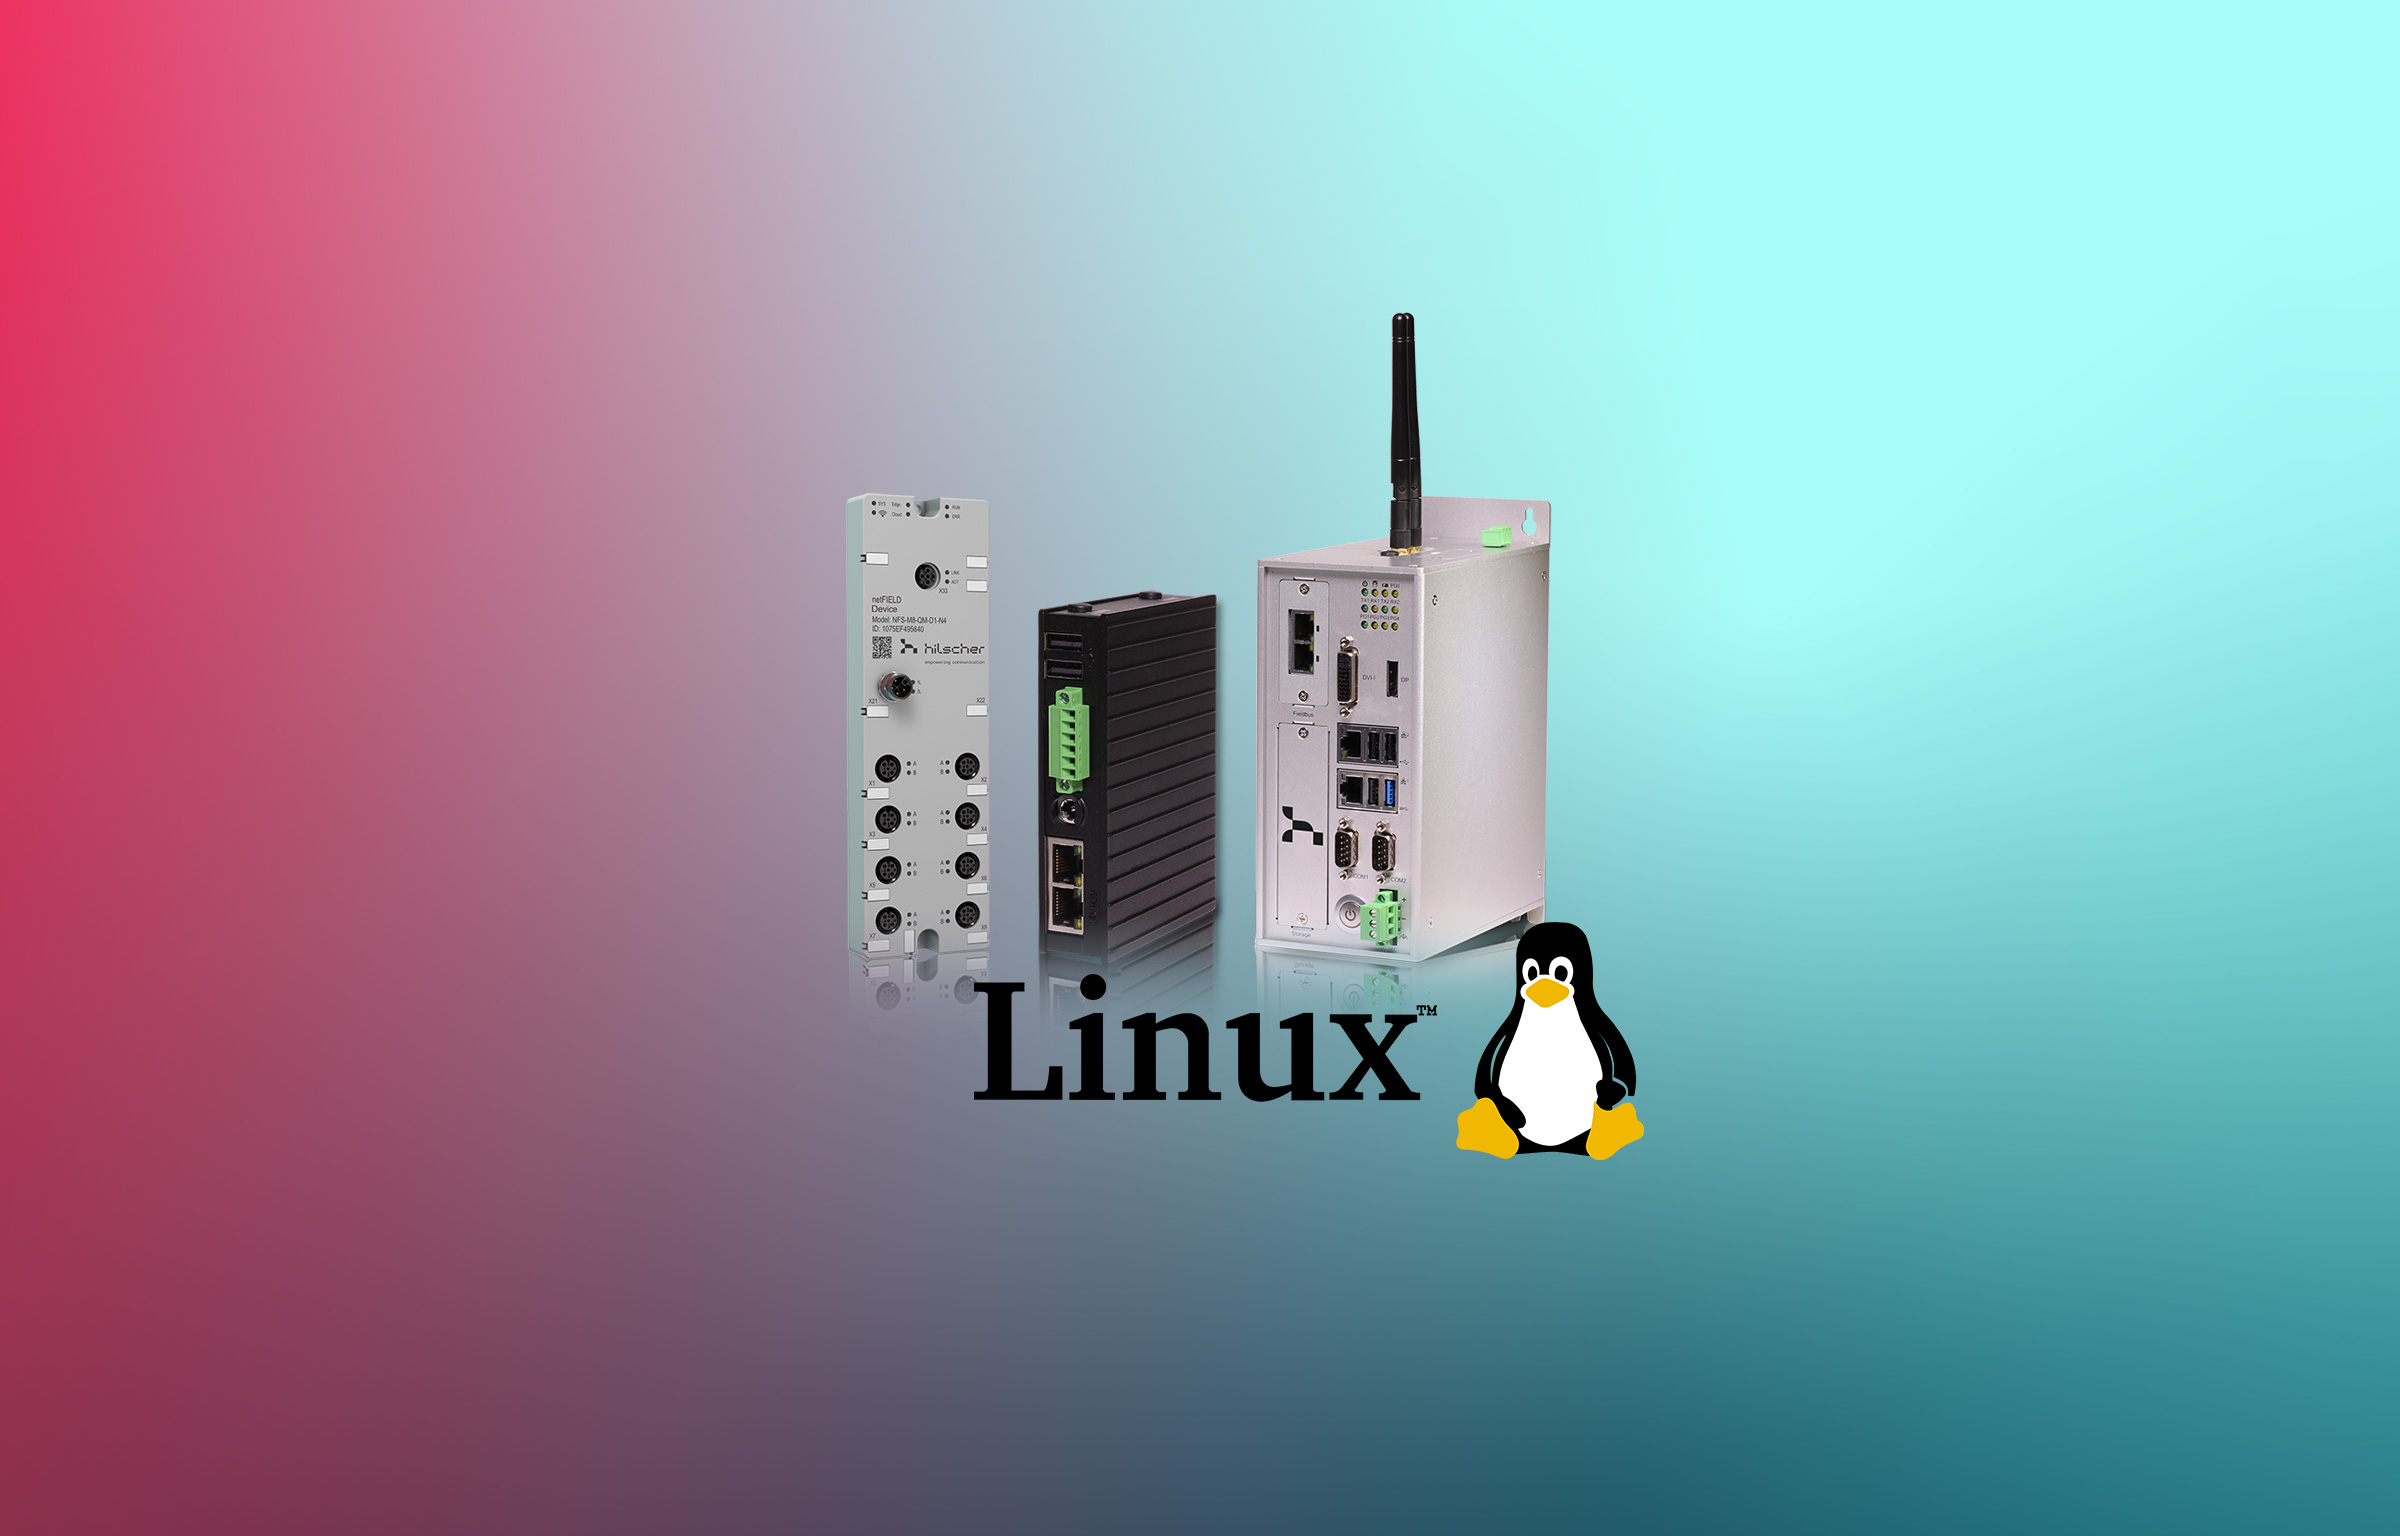 Three gateways are lined up on a colorful background containing red and cyan as well as dark blue. Under the devices, there is a Linux lettering with a penguin (Tux) on the right side.